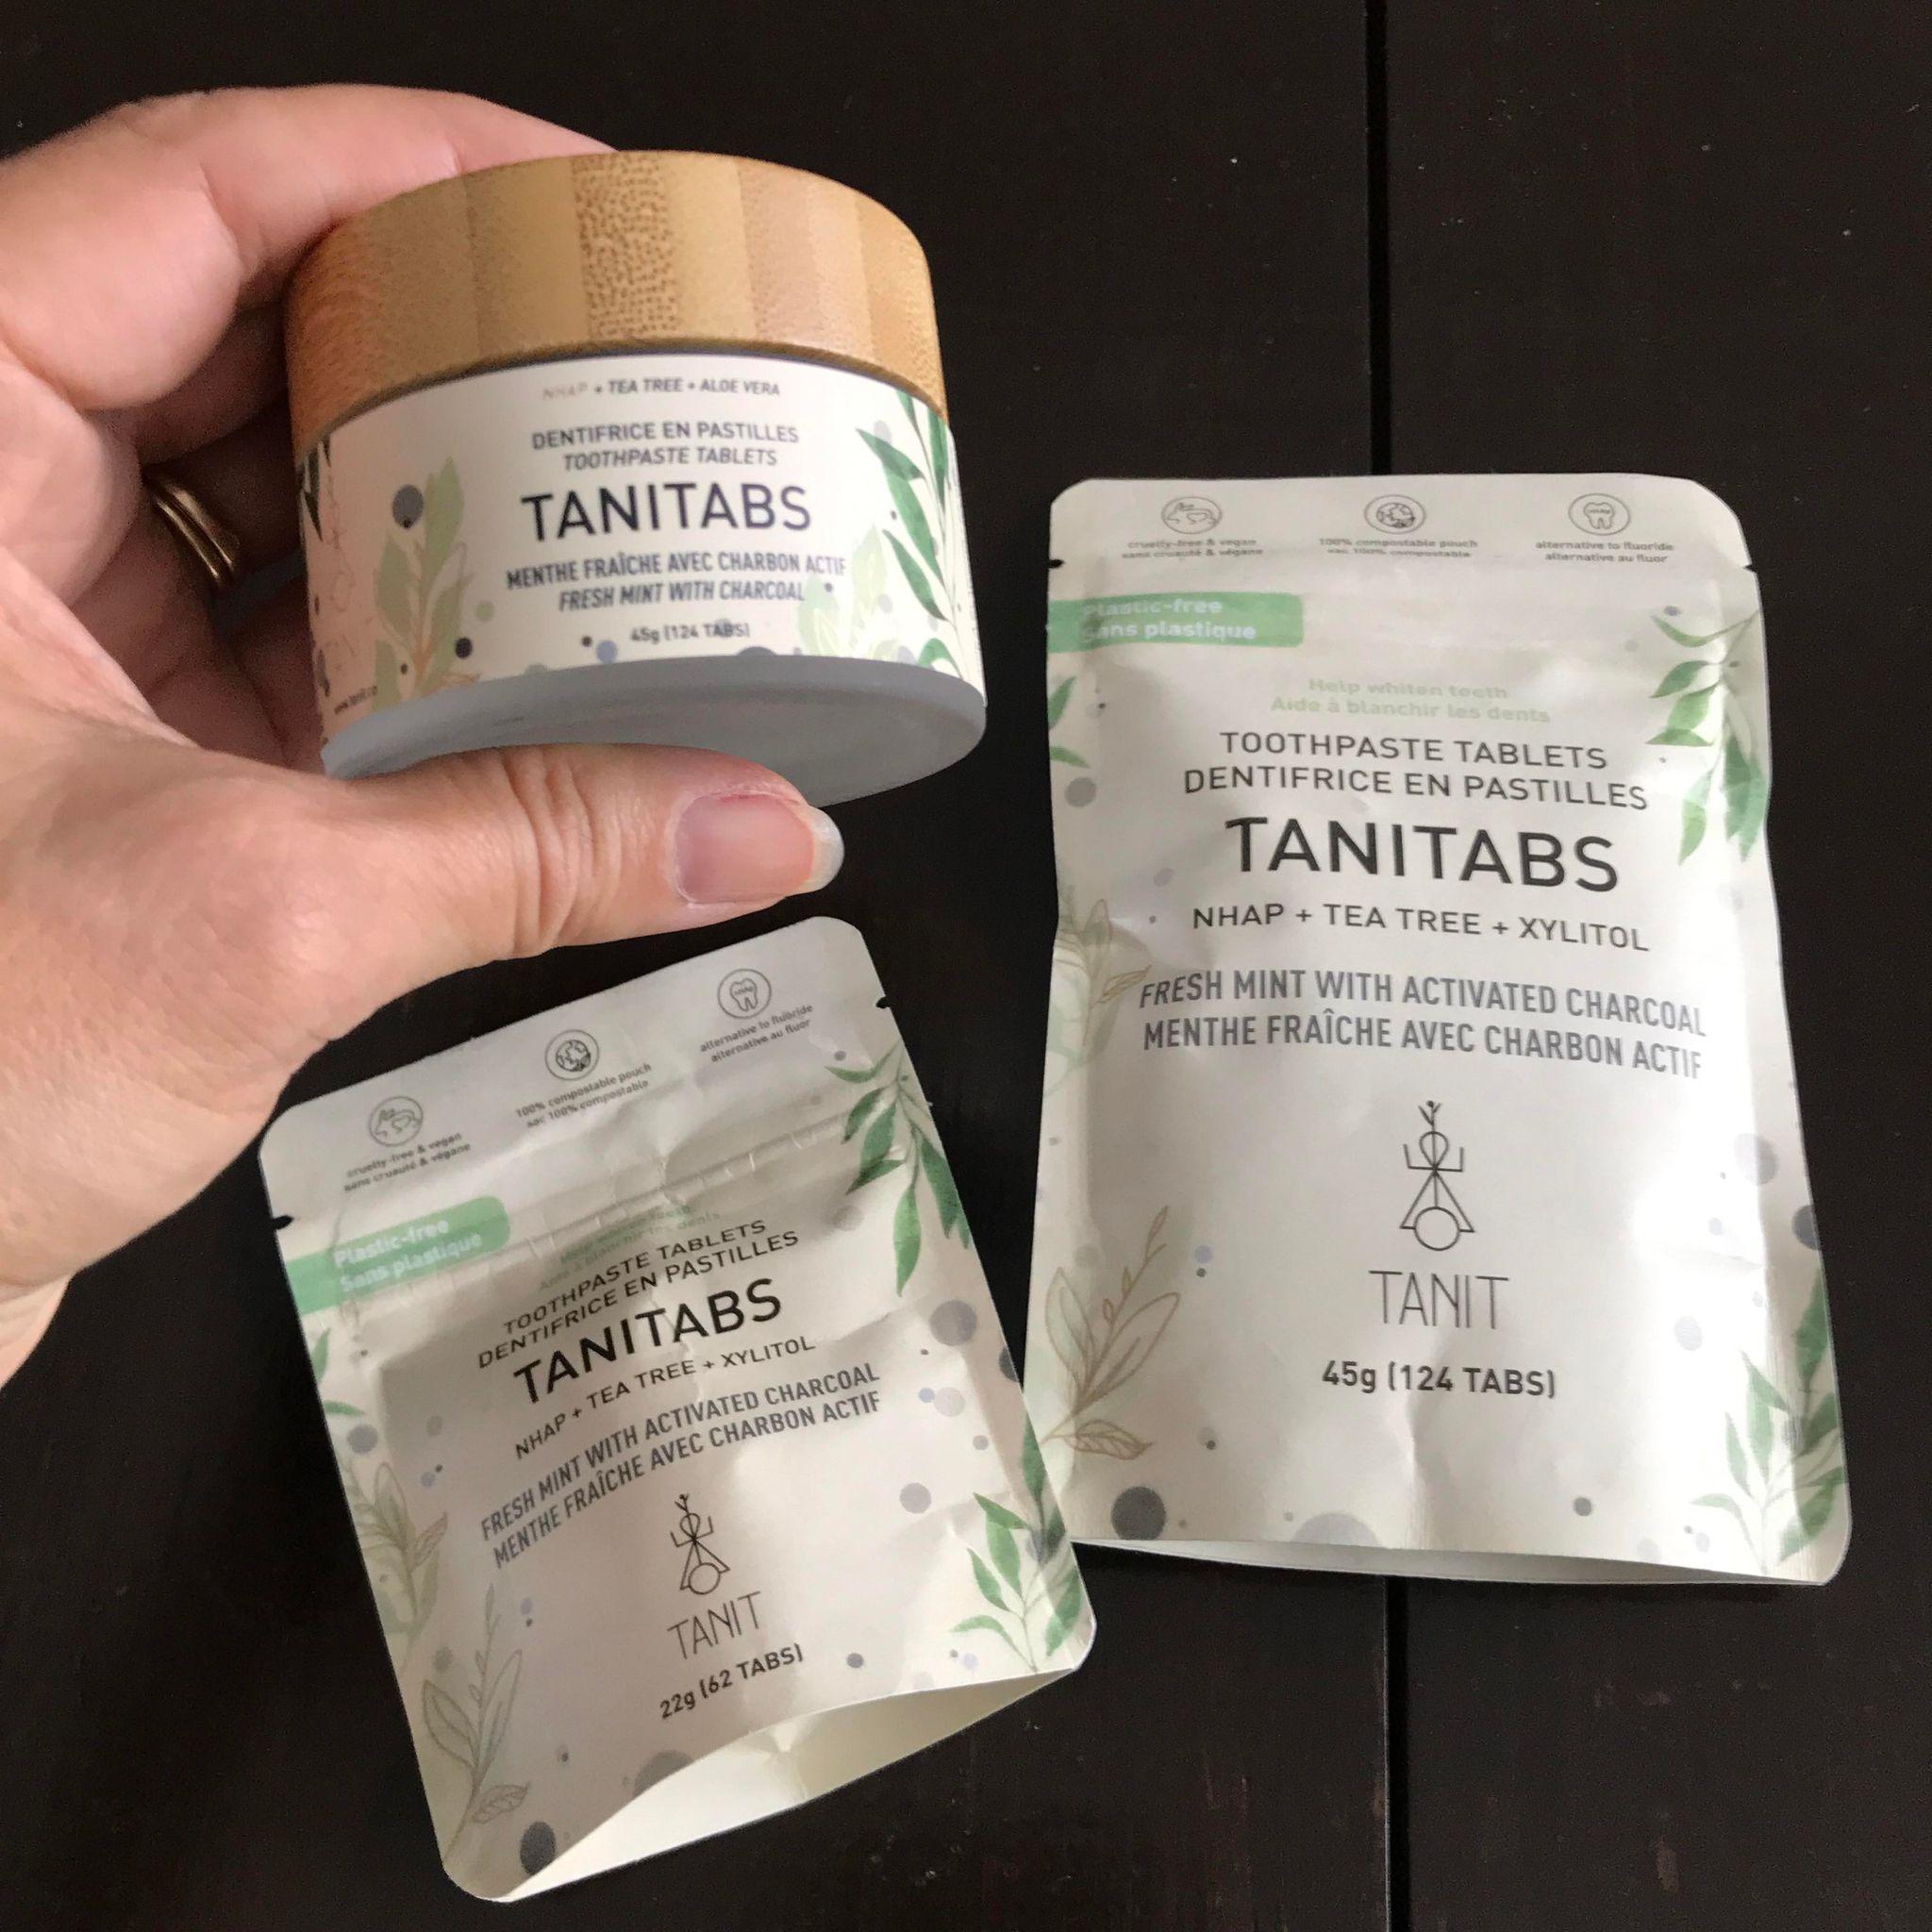 Fresh mint activated charcoal toothpaste tablets available in a 45 g glass jar (124 tablets)  as well as compostable pouches of either 62 or 124 tablets made in Canada by Tanit